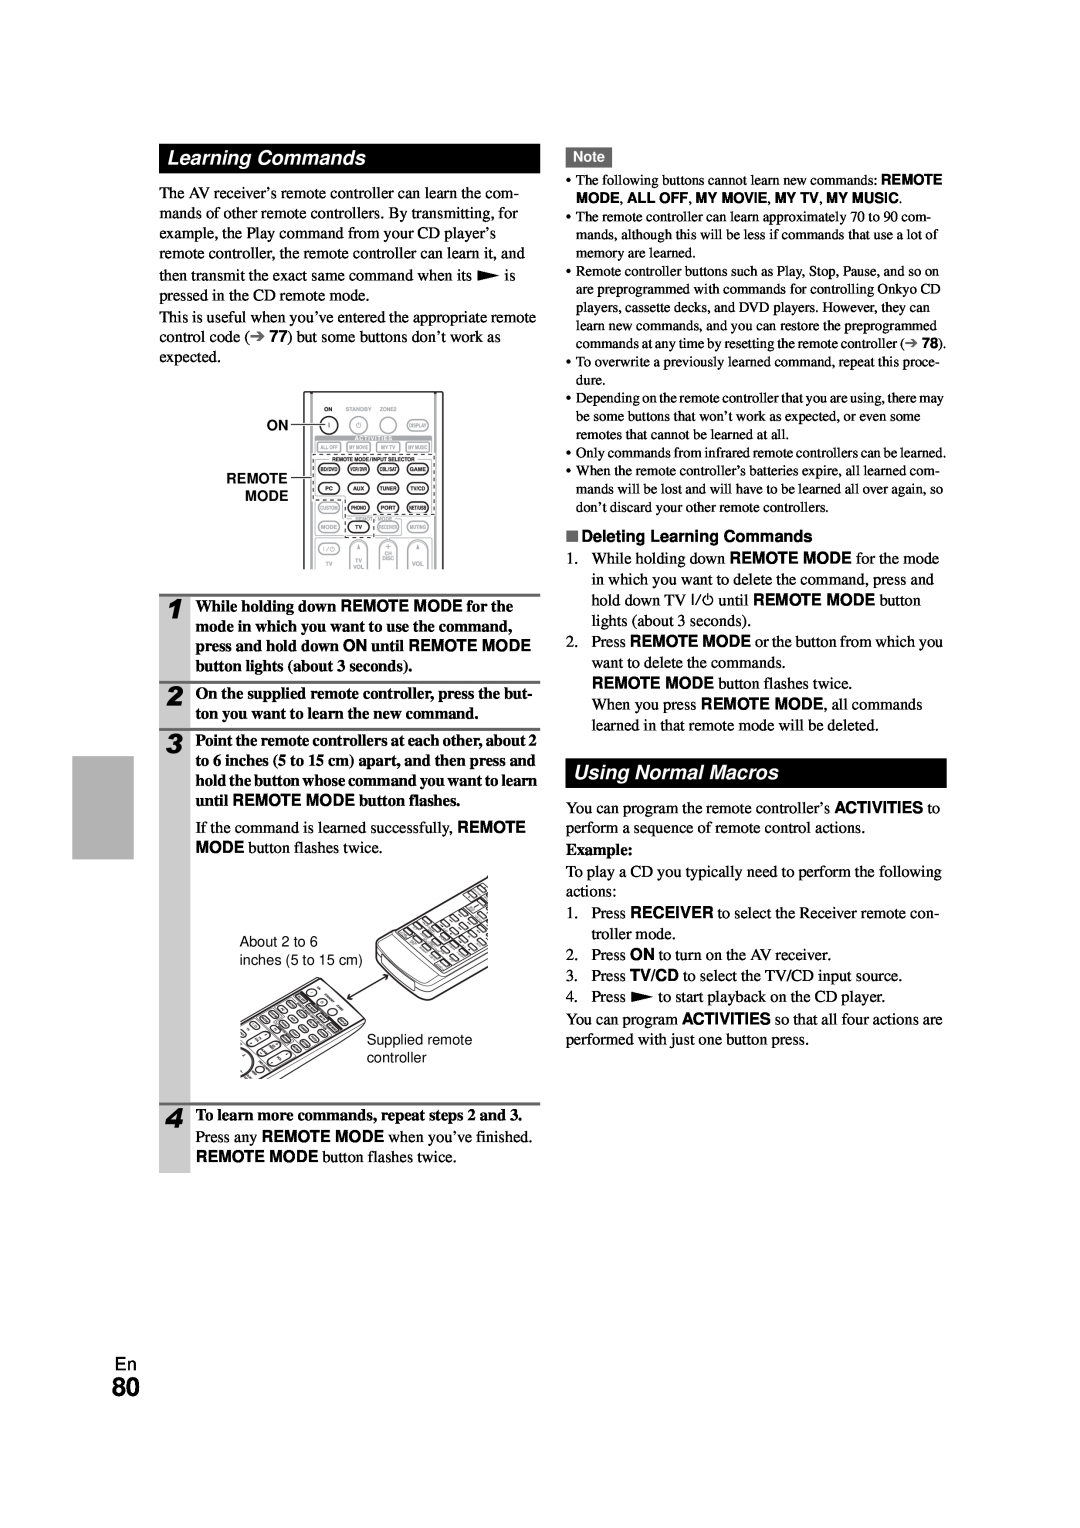 Onkyo HT-RC270 instruction manual Using Normal Macros, Deleting Learning Commands 